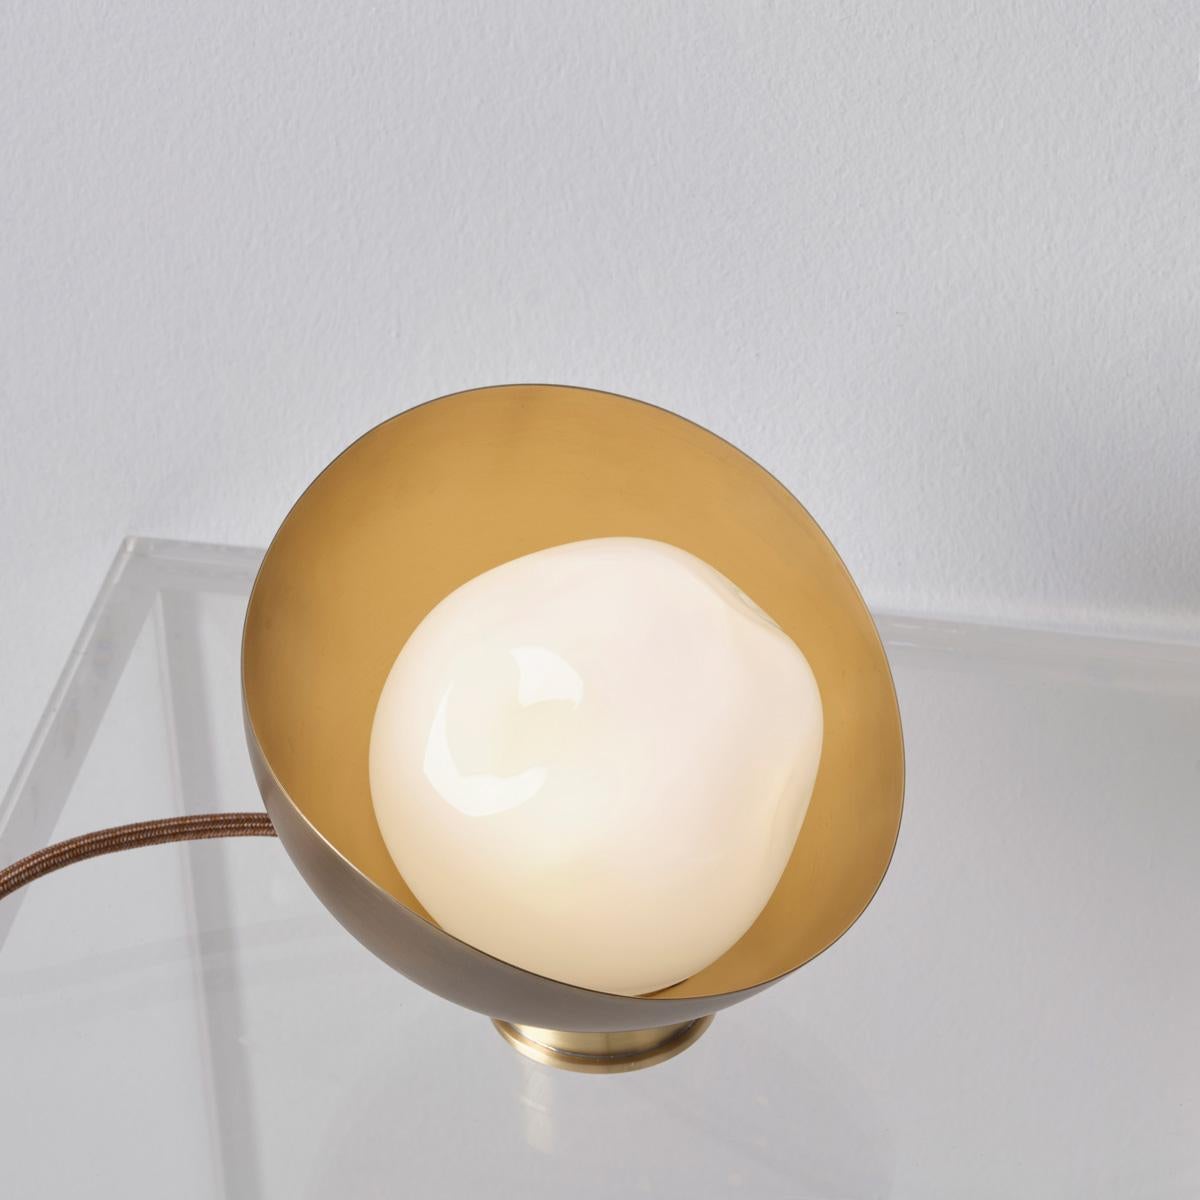 Perla Mini Table Lamp by Gaspare Asaro. Bronze and Satin Brass Finish In New Condition For Sale In New York, NY